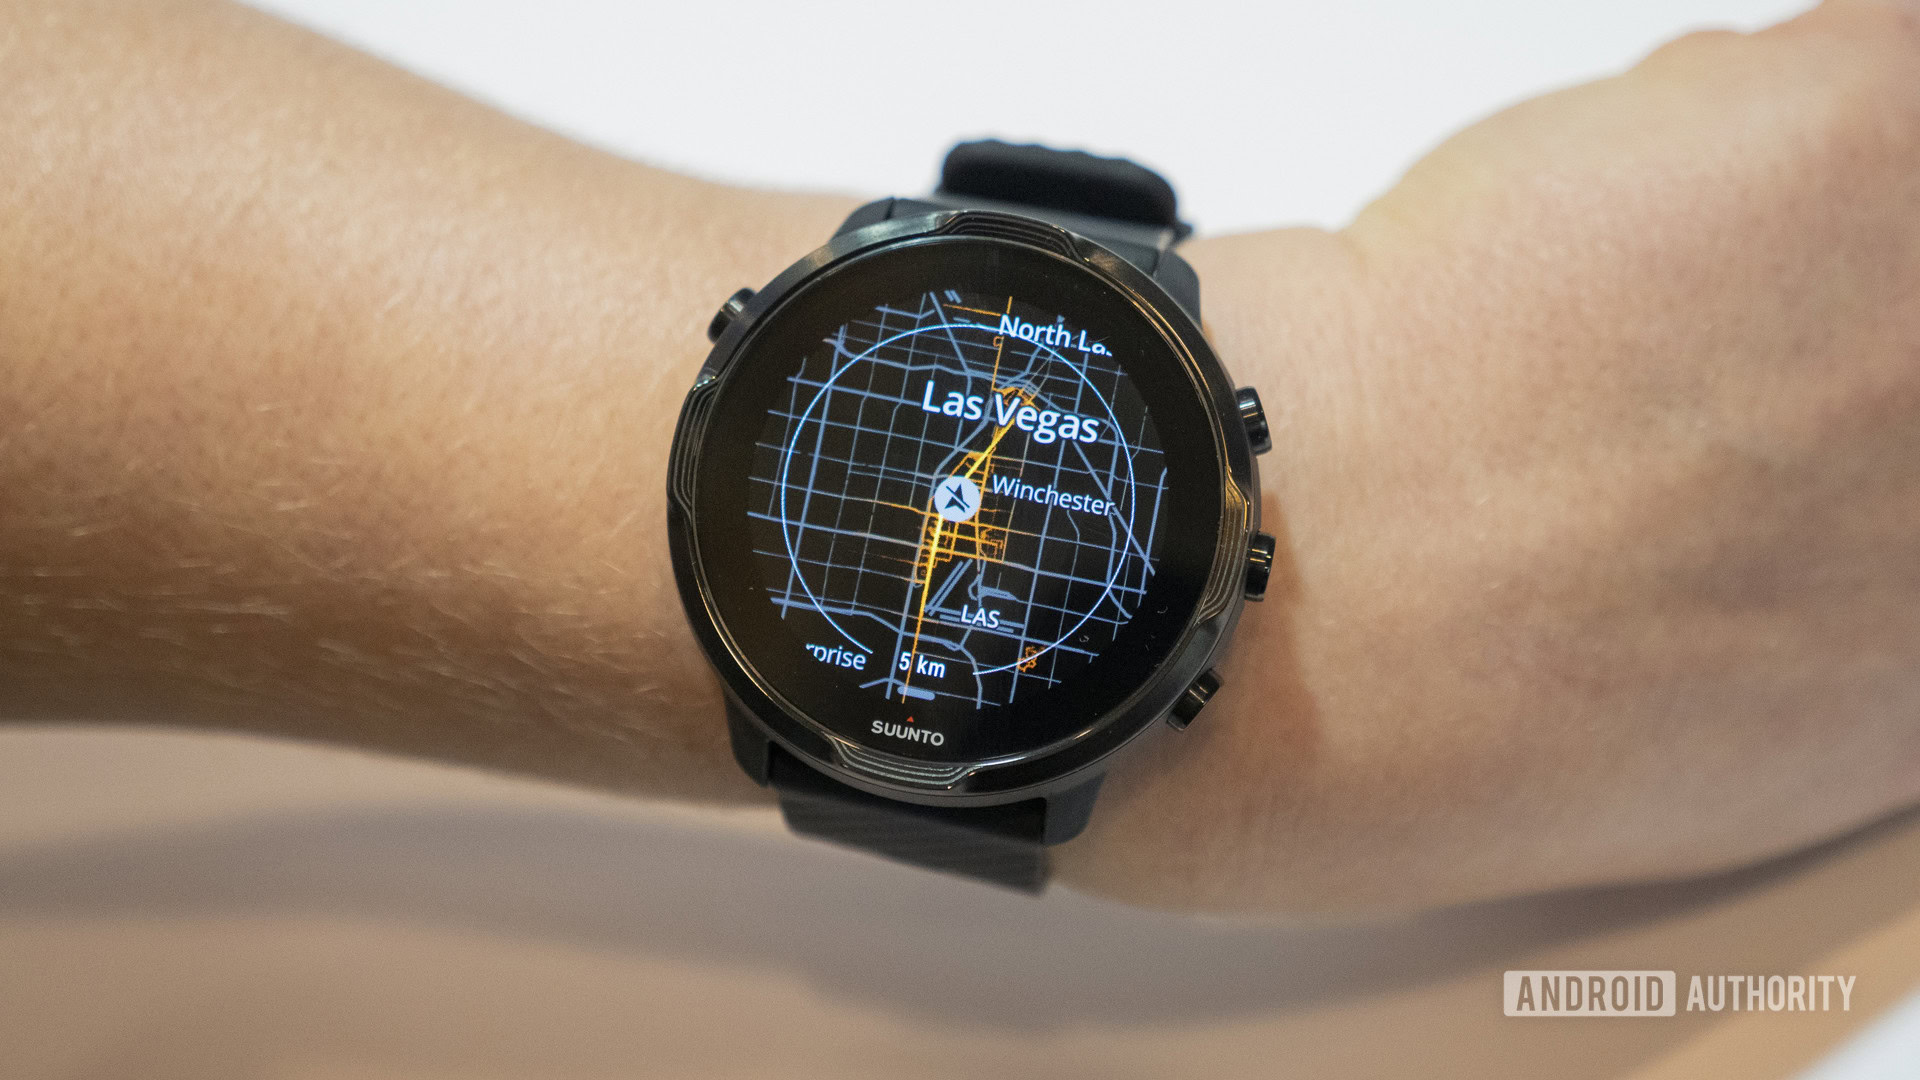 The Suunto 7 has a trick to make battery life last so long: It's